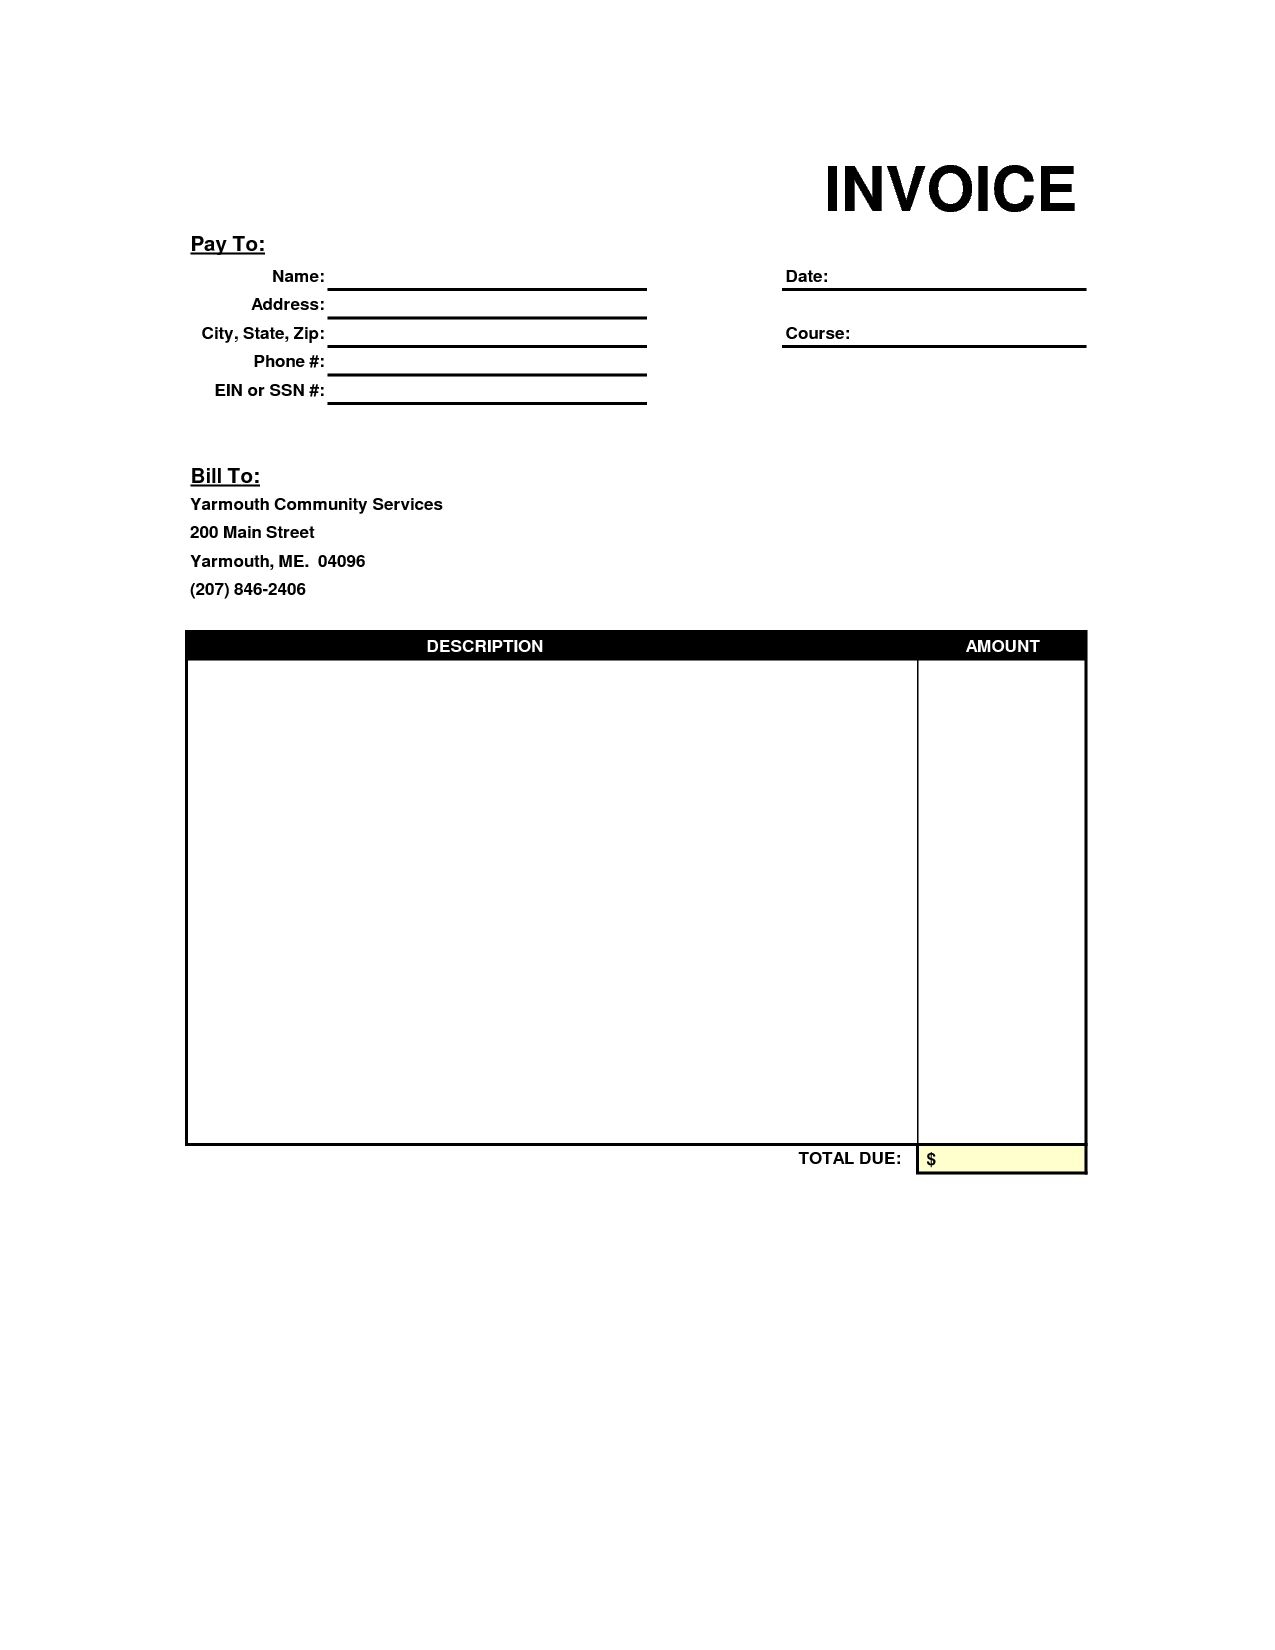 Blank Copy Of An Invoice Google Recruiter Resume Copy Of Blank - Free Printable Blank Invoice Sheet